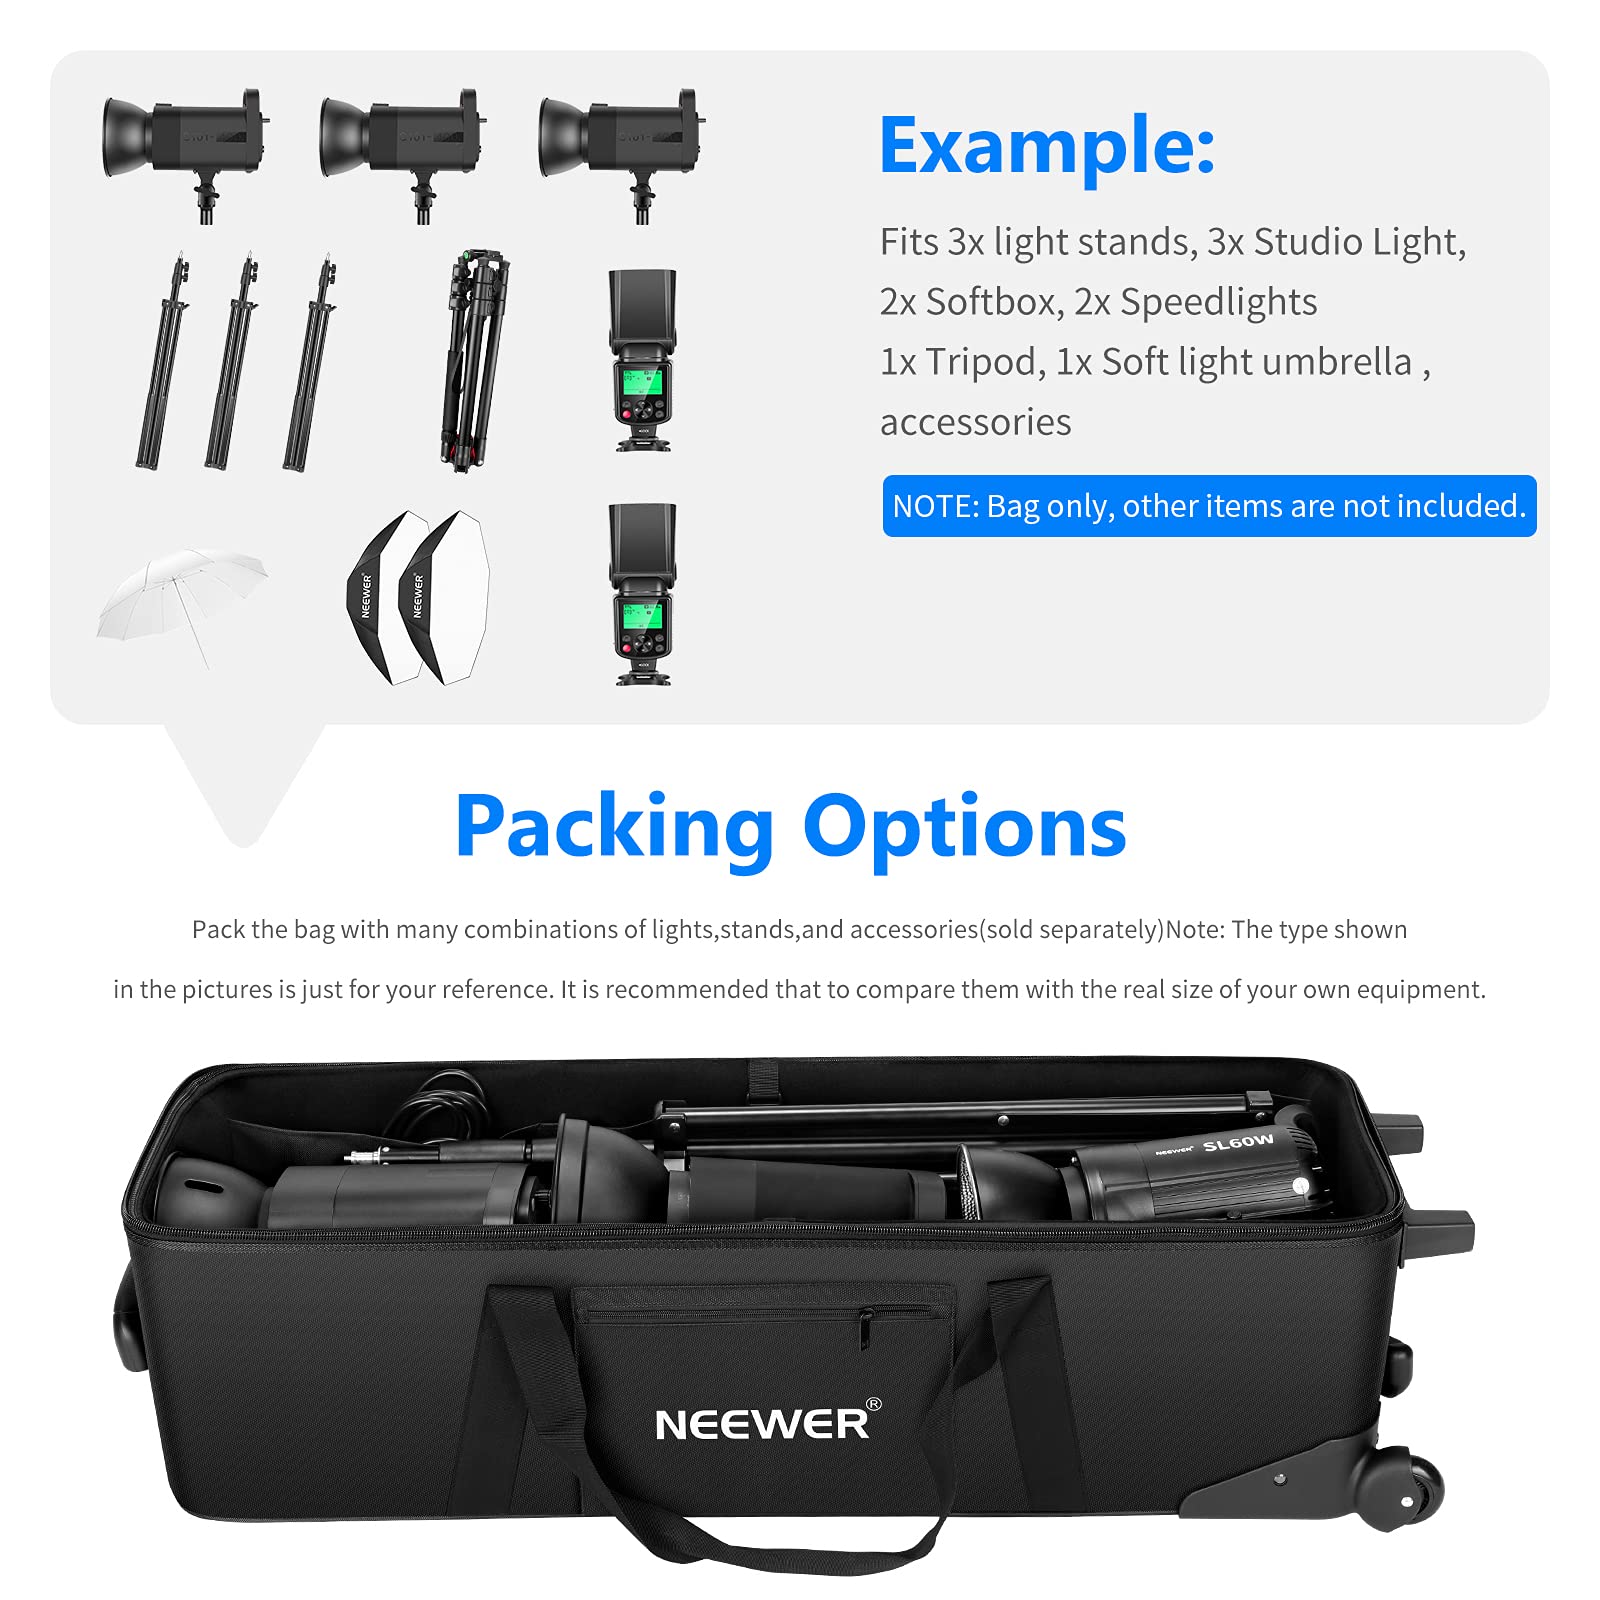 Neewer Photo Studio Equipment Case Rolling Bag 40.1x11.8x11.8 inches/102x30x30cm Trolley Carrying Case for Light Stand, Tripod, Light, Umbrella, etc